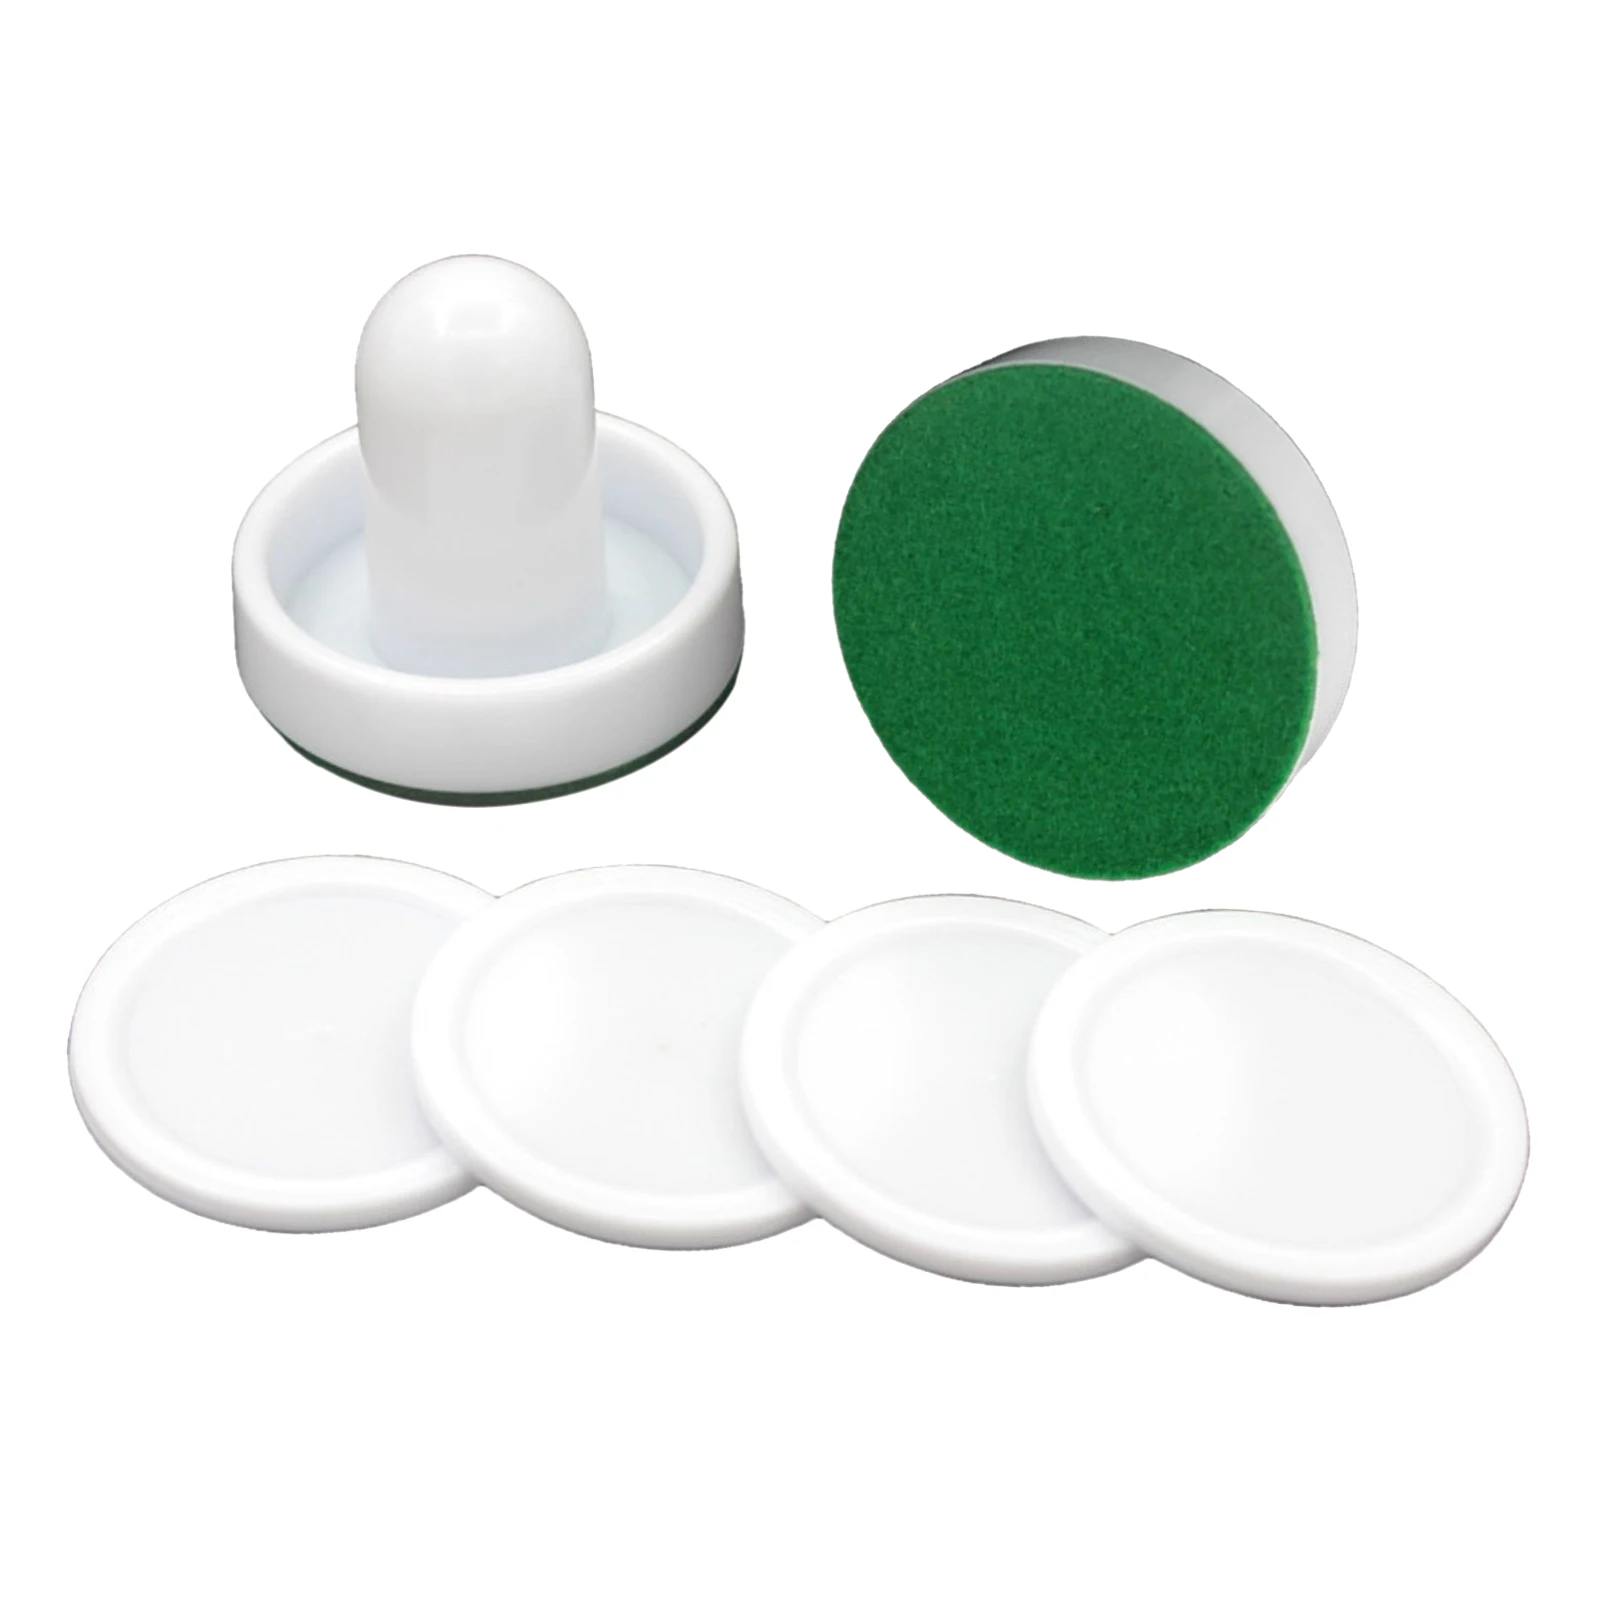 2PCS Plastic Air Hockey Pushers and 4PCS Pucks Replacement for Game Tables Black